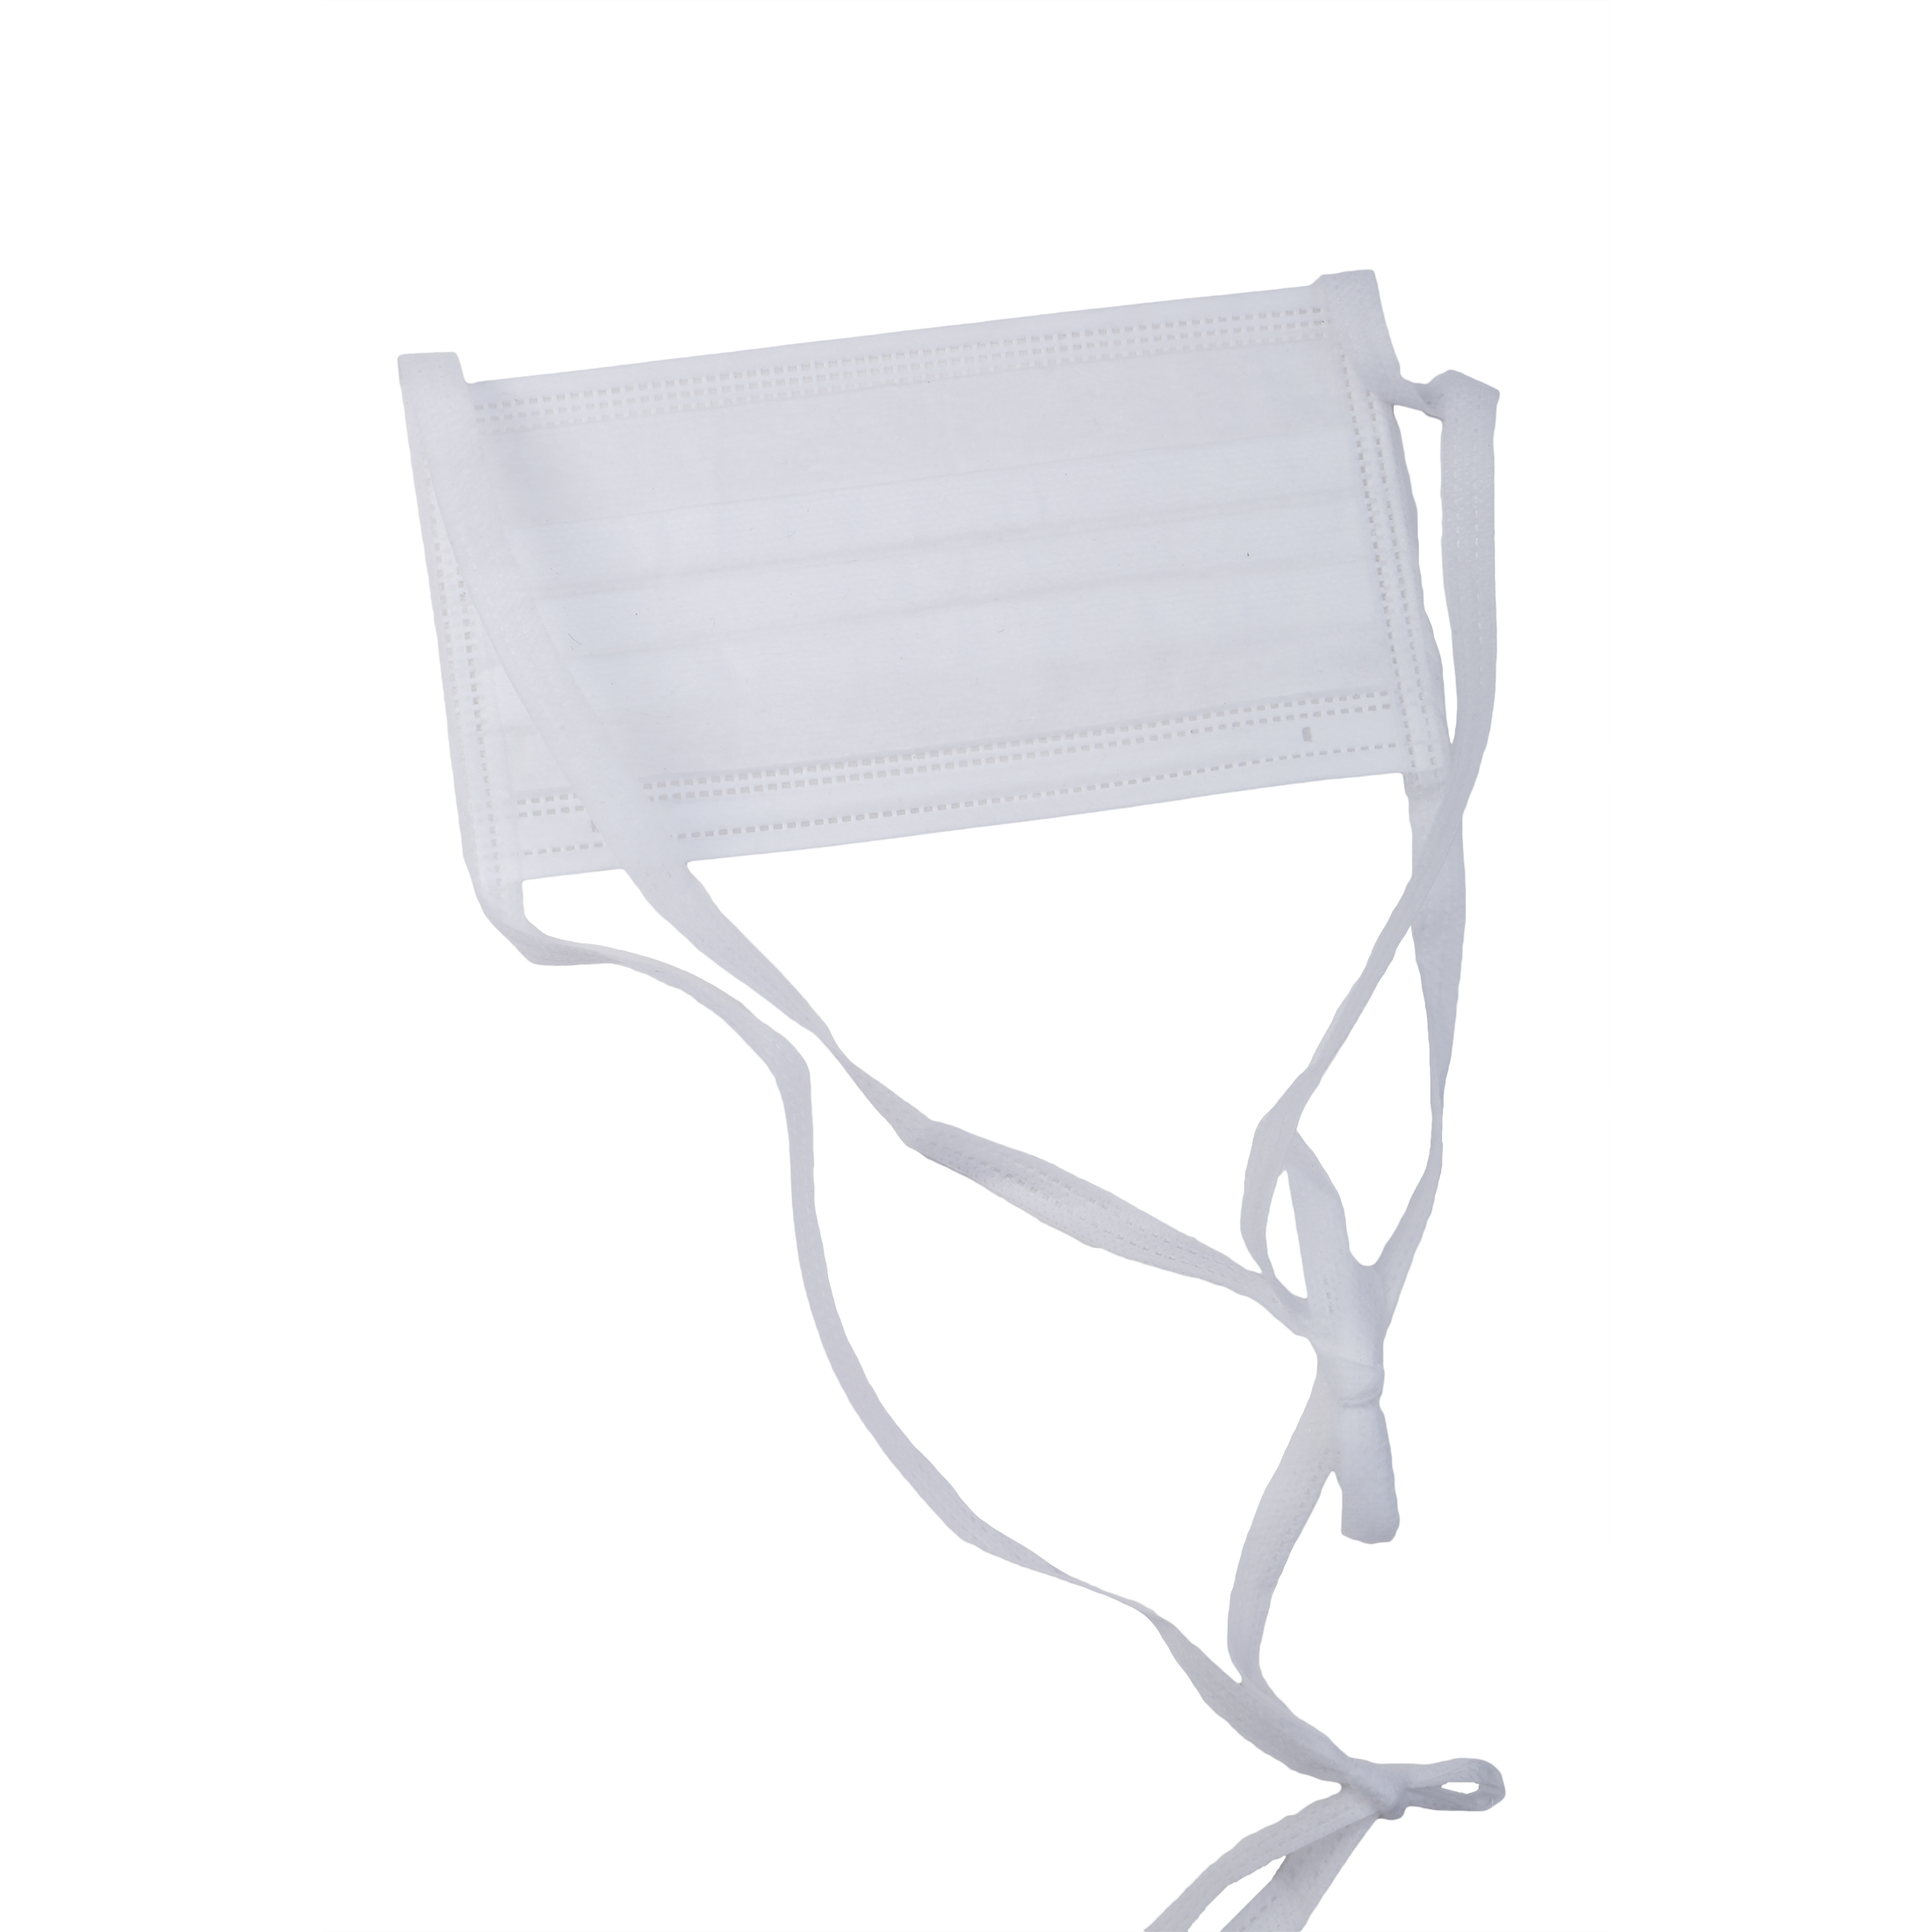 Protective Disposable PP Non Woven Face Mask with Tie on